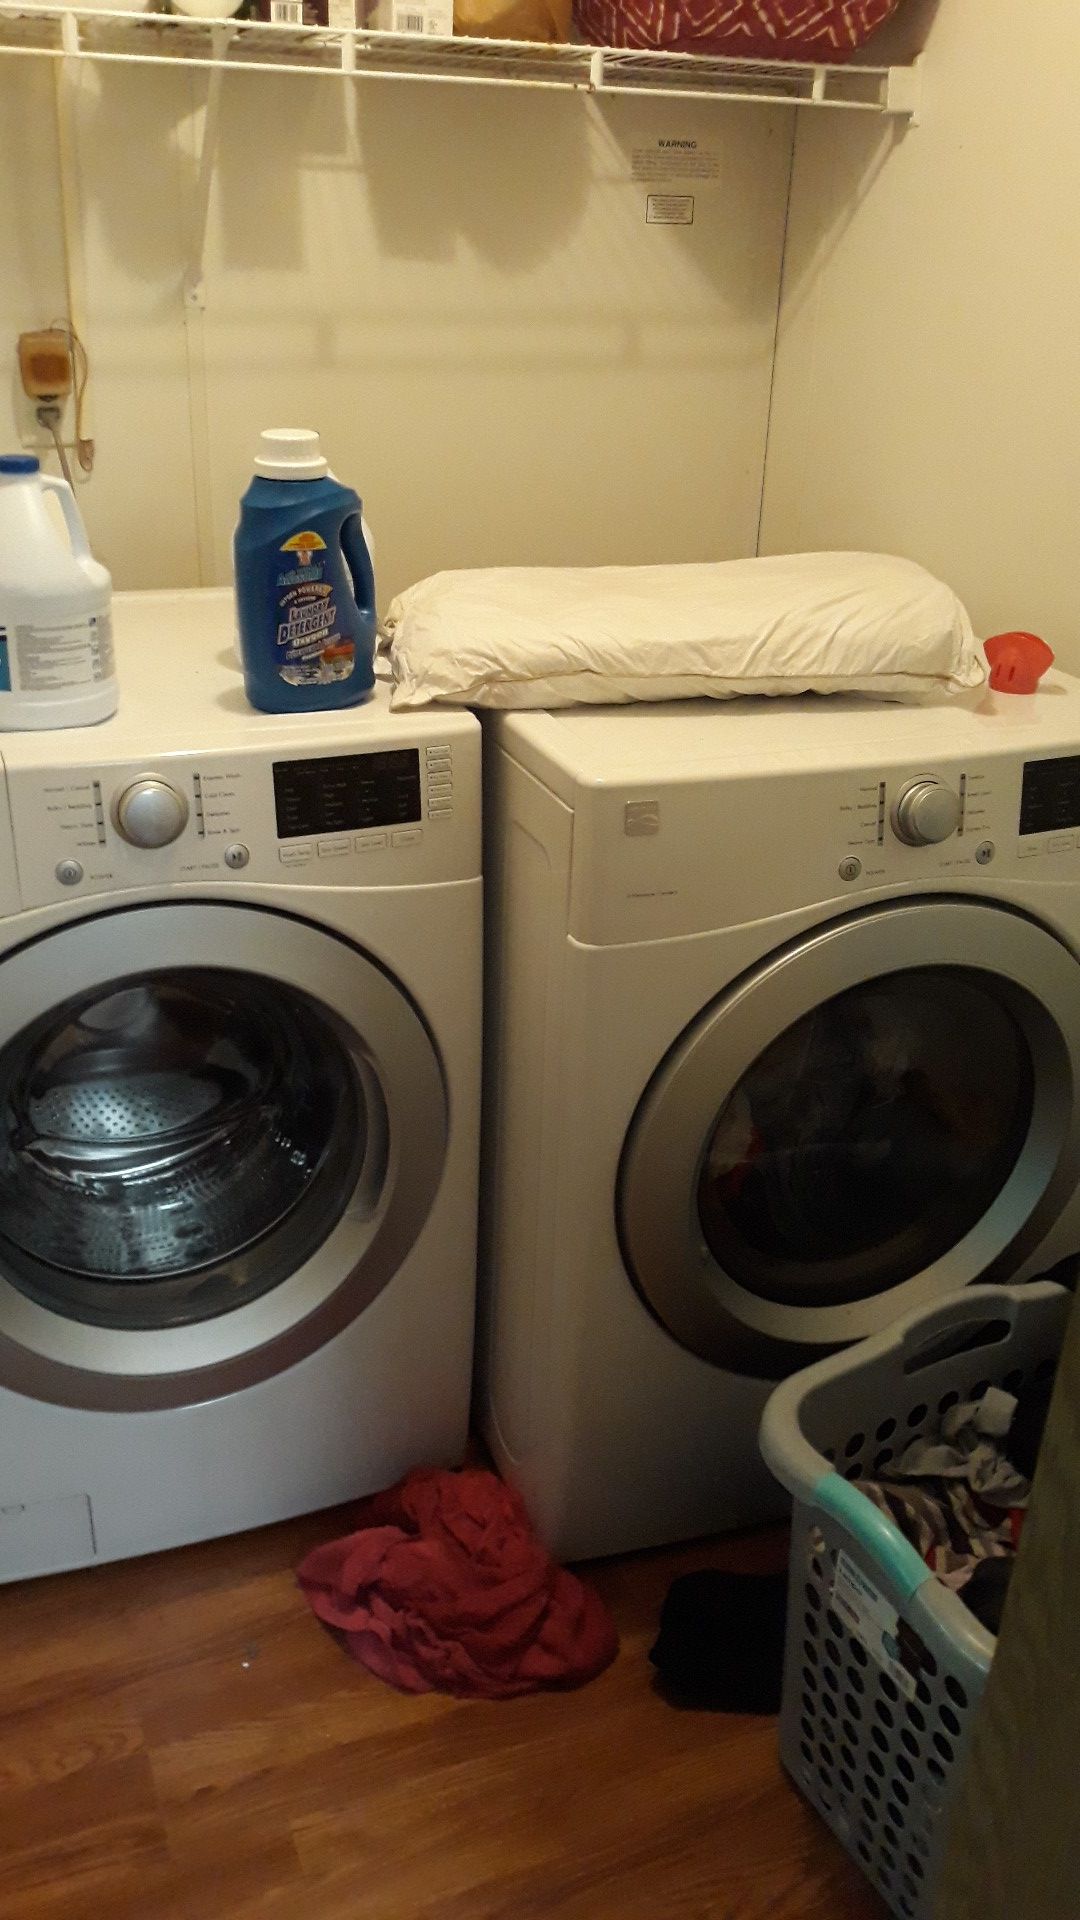 Kenmore front end washer and dryer paid 2500.00 7 months ago letting them go for 1200.00